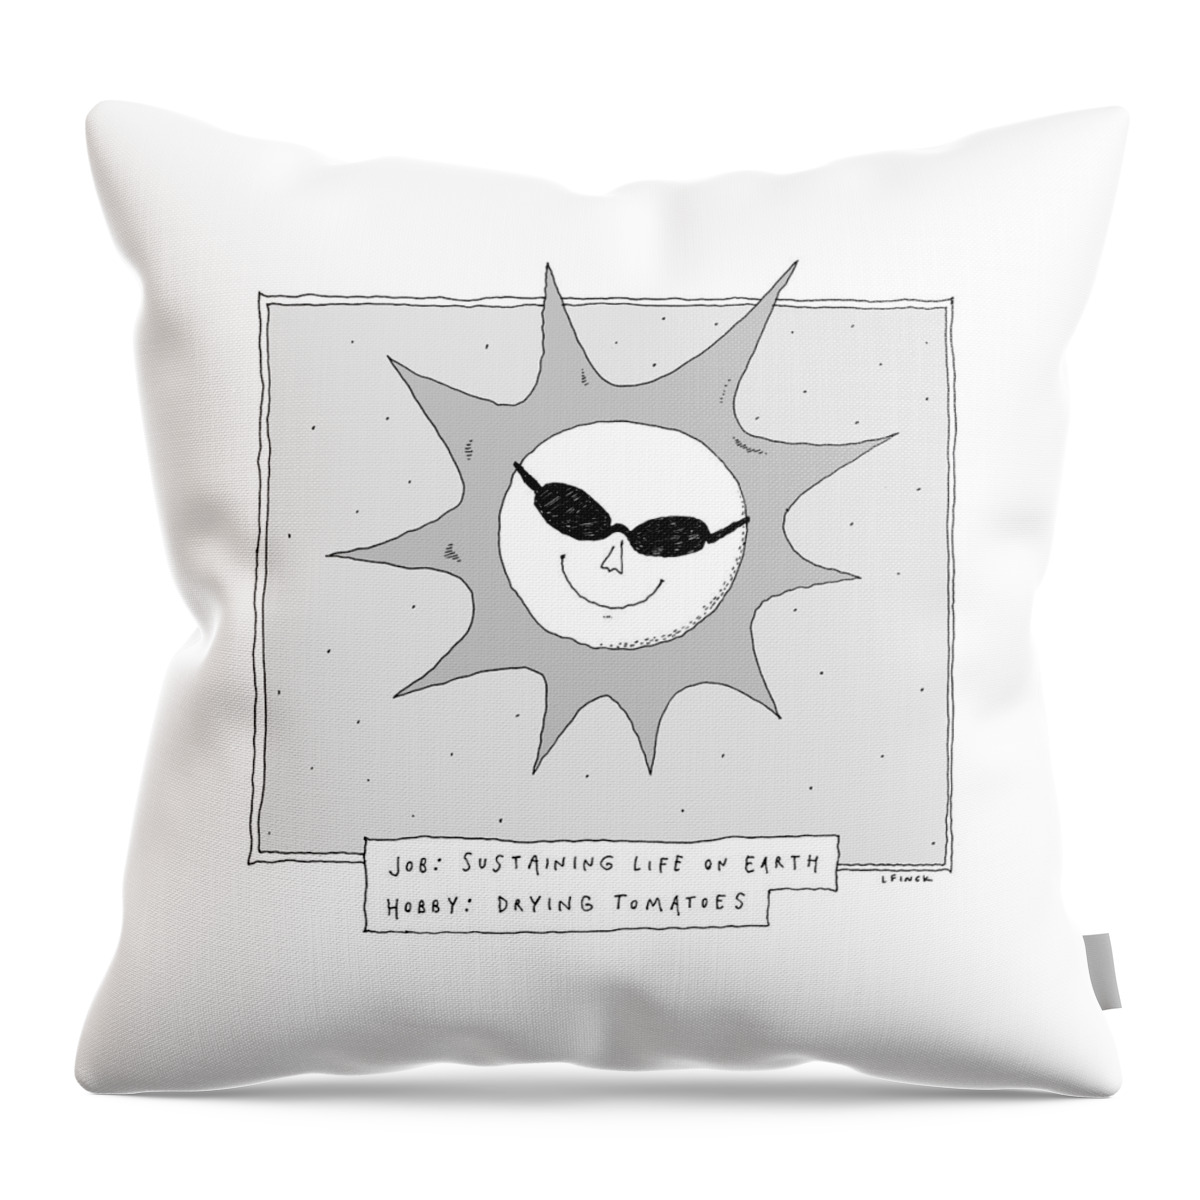 Sustaining Life On Earth Throw Pillow